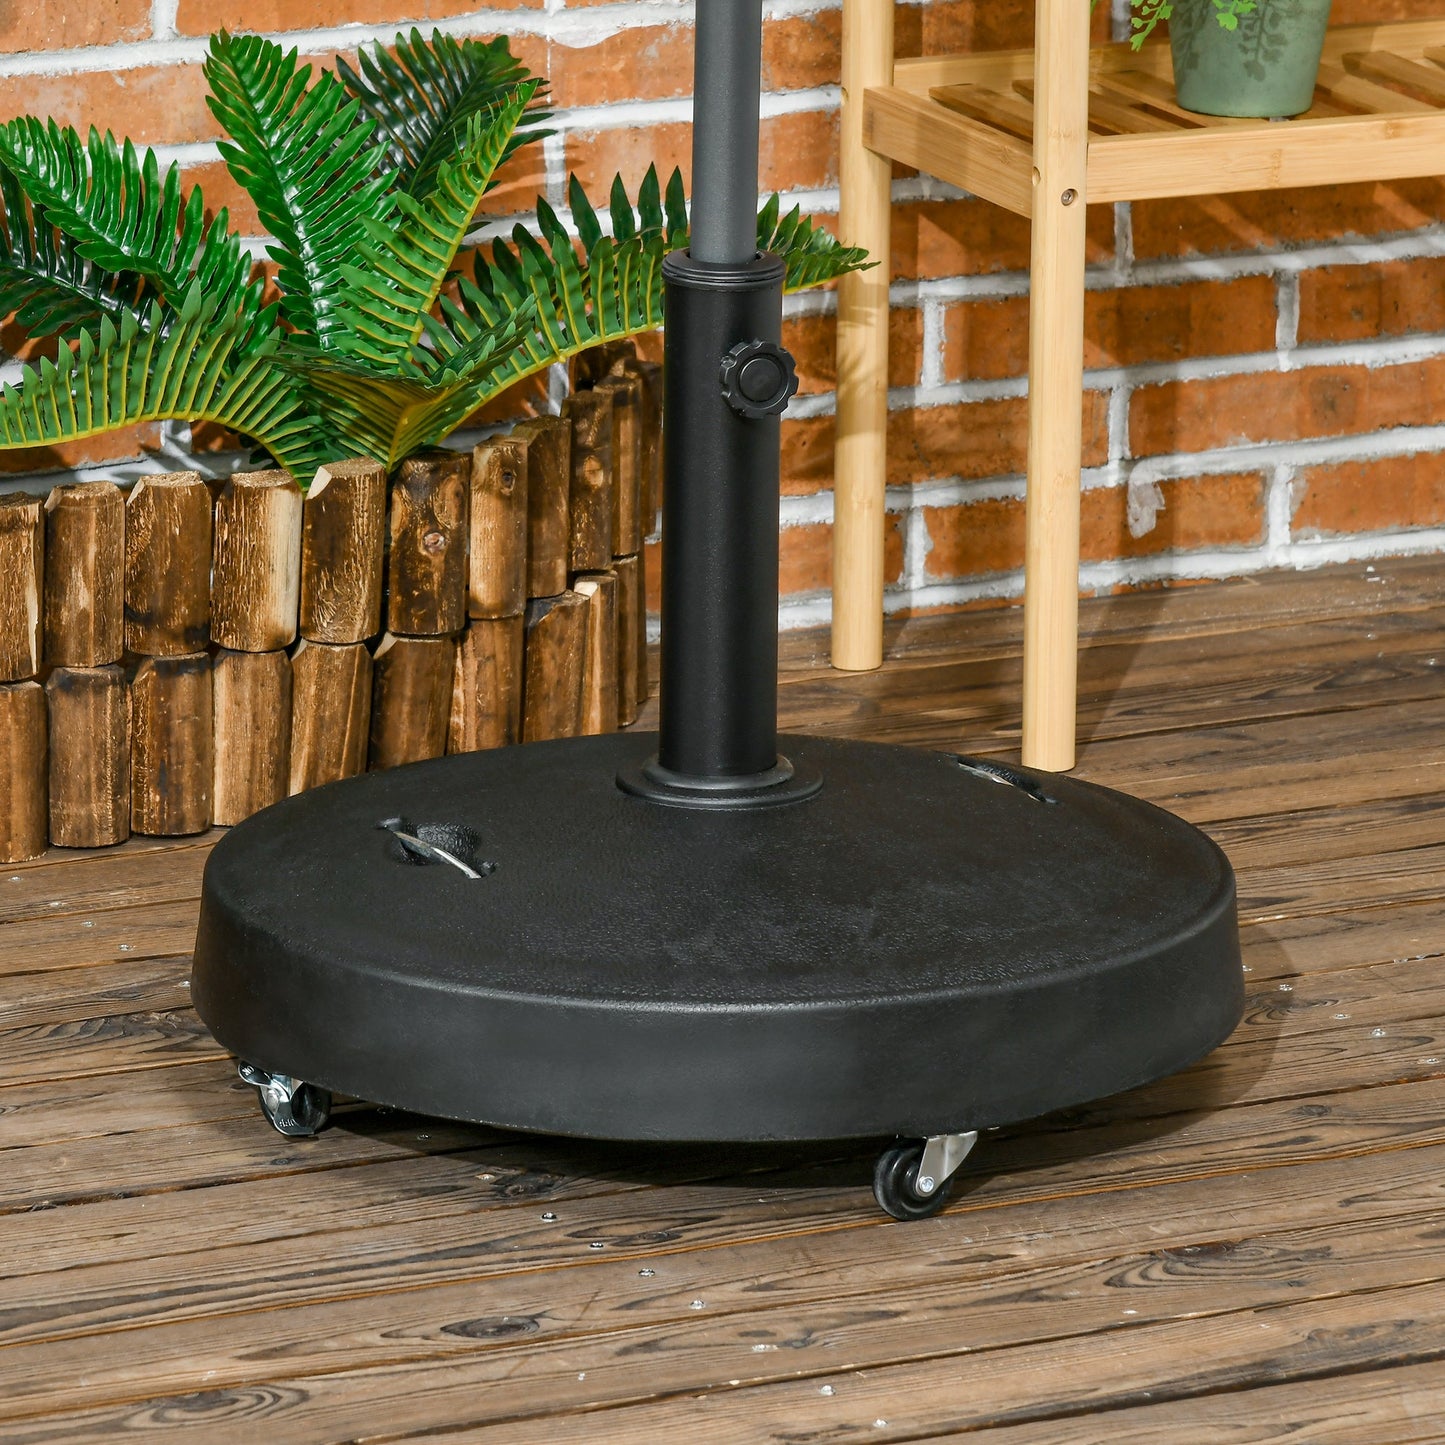 Outdoor and Garden-52lbs Resin Patio Umbrella Base with Wheels and Retractable Handles, 20" Round Outdoor Umbrella Stand Holder, Black - Outdoor Style Company